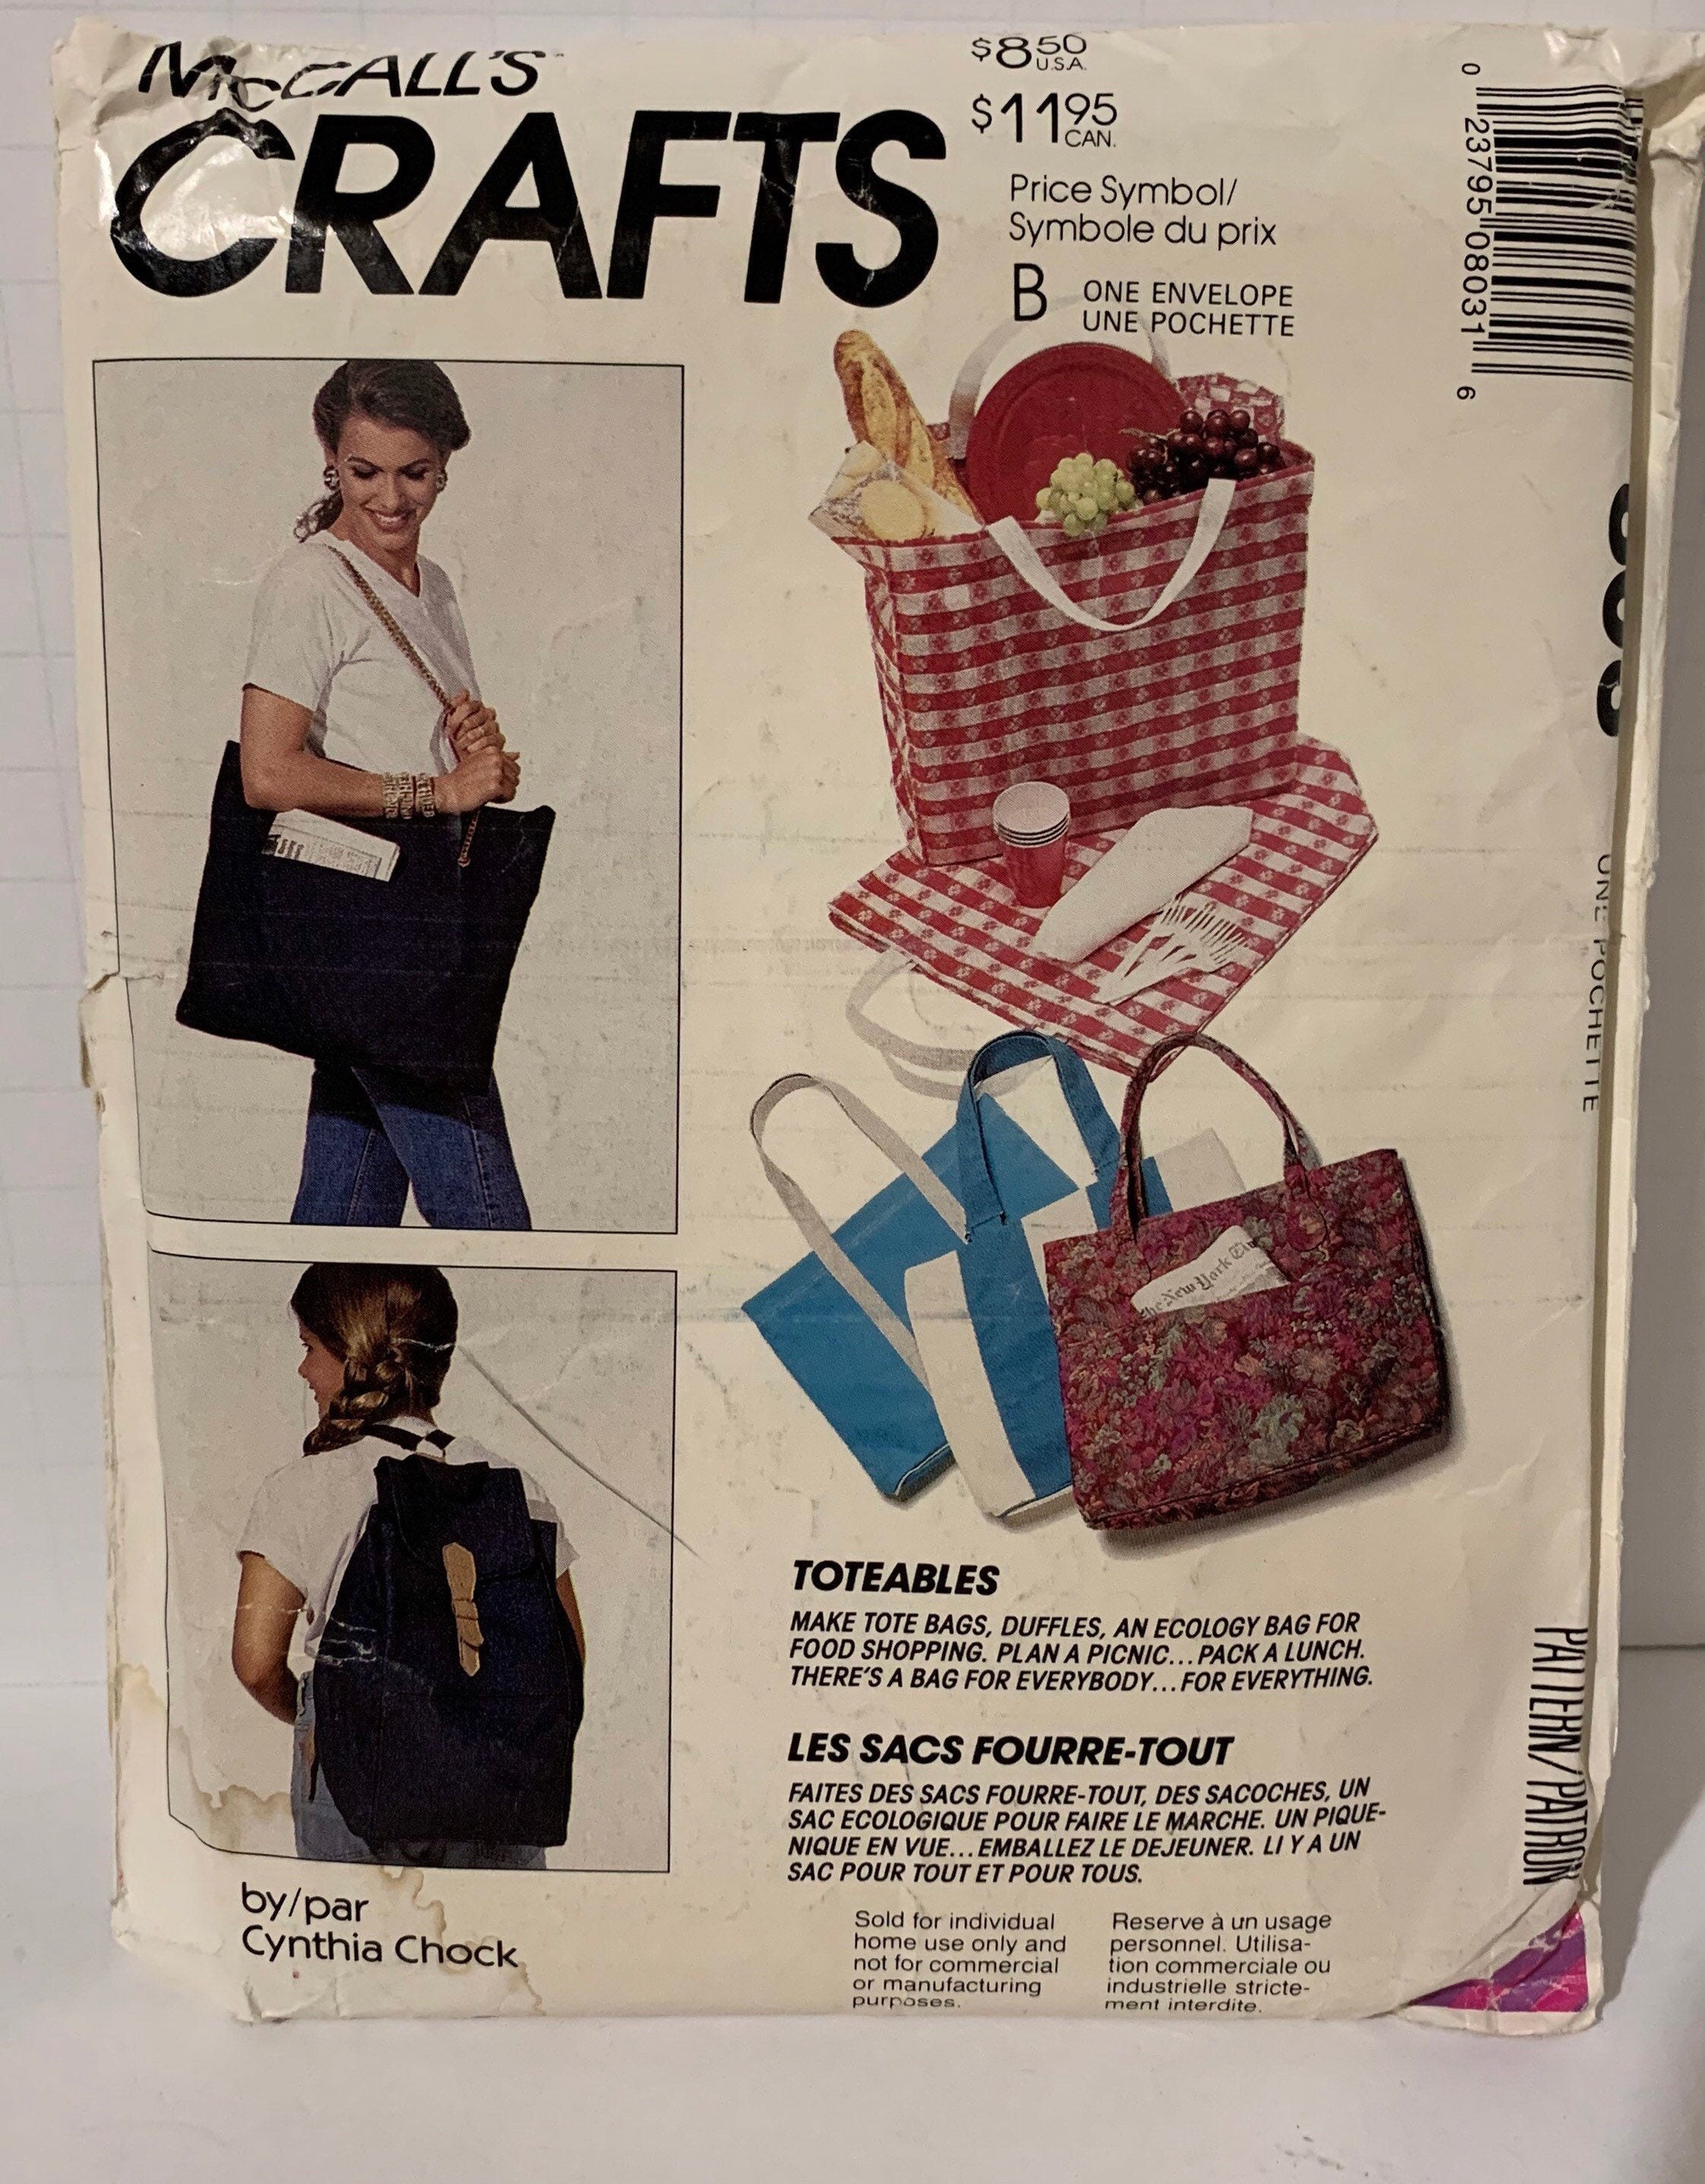 McCalls 803 Craft Sewing Pattern Toteables Accessories | Etsy